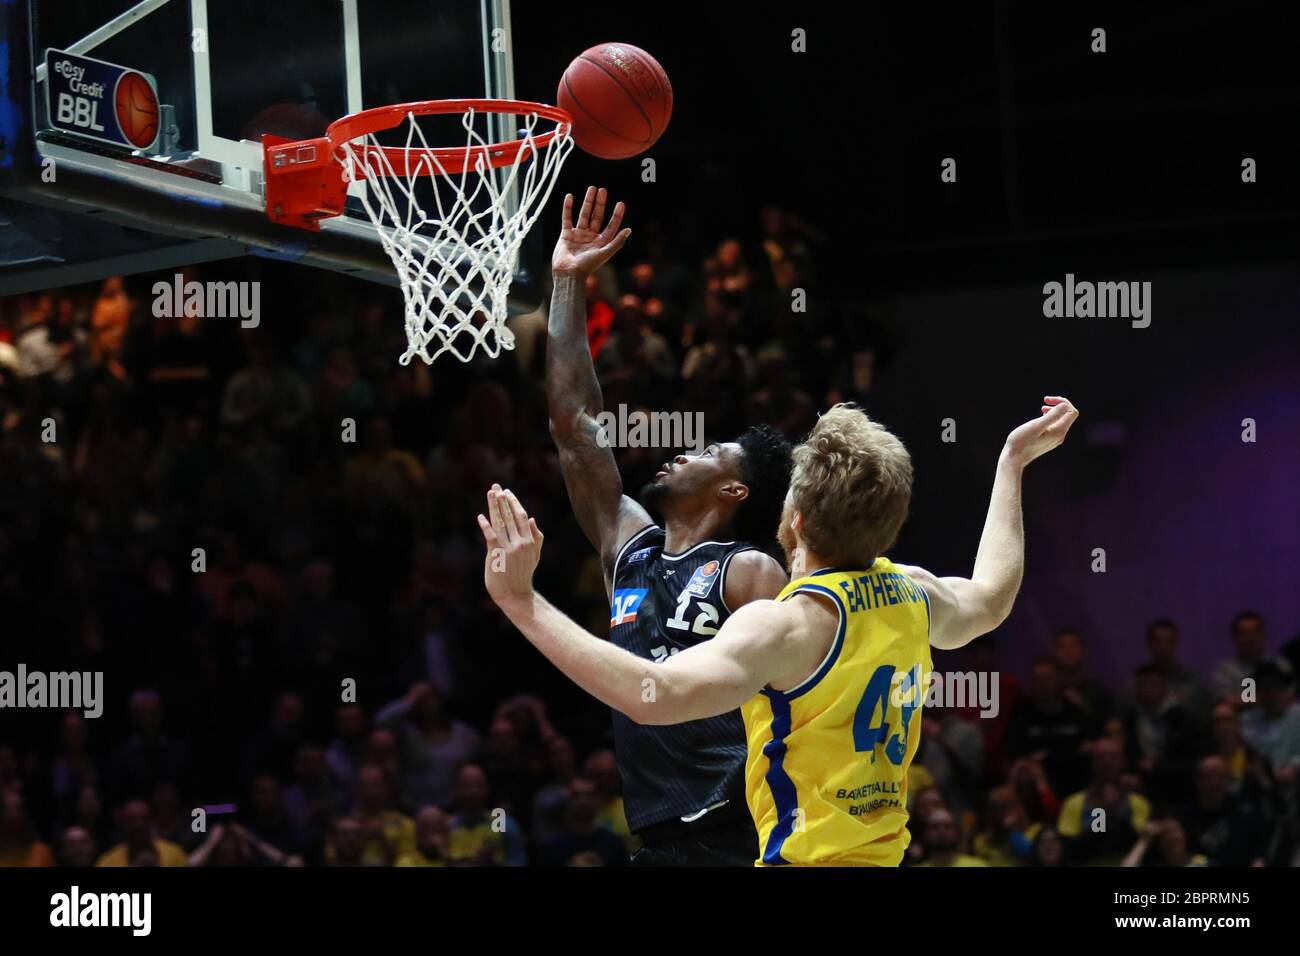 Braunschweig, Germany, December 27, 2019:Quincy Ford of Merlins Crailsheim score a point during the Basketball BBL Bundesliga match Stock Photo